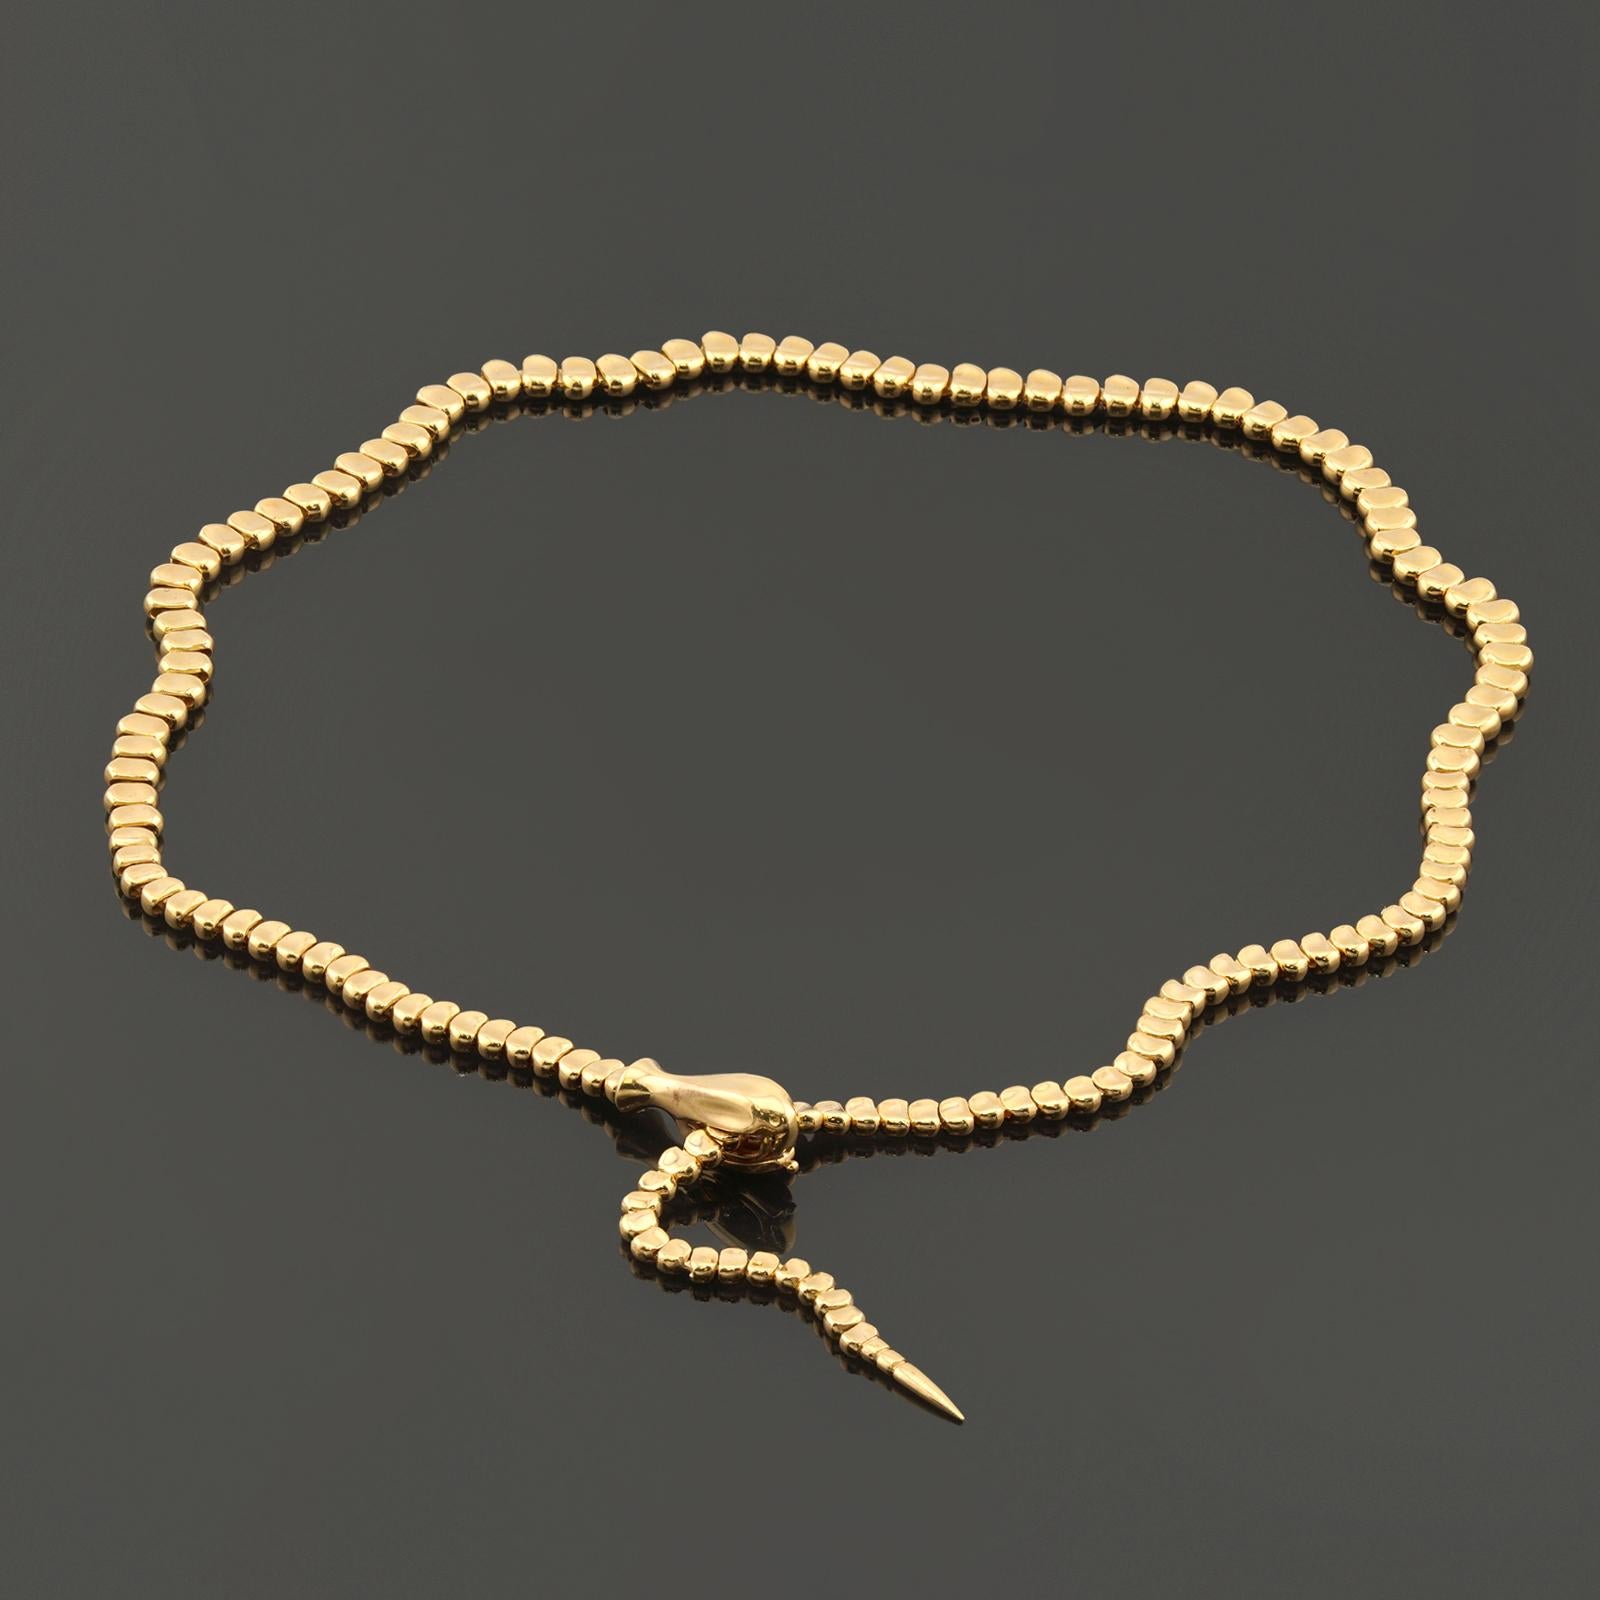 This gorgeous authentic Tiffany & Co. necklace was designed by Elsa Peretti and features a fluid serpentine form crafted in 18k yellow gold. The length is adjustable. Made in United States circa 2020s. Measurements: 0.19